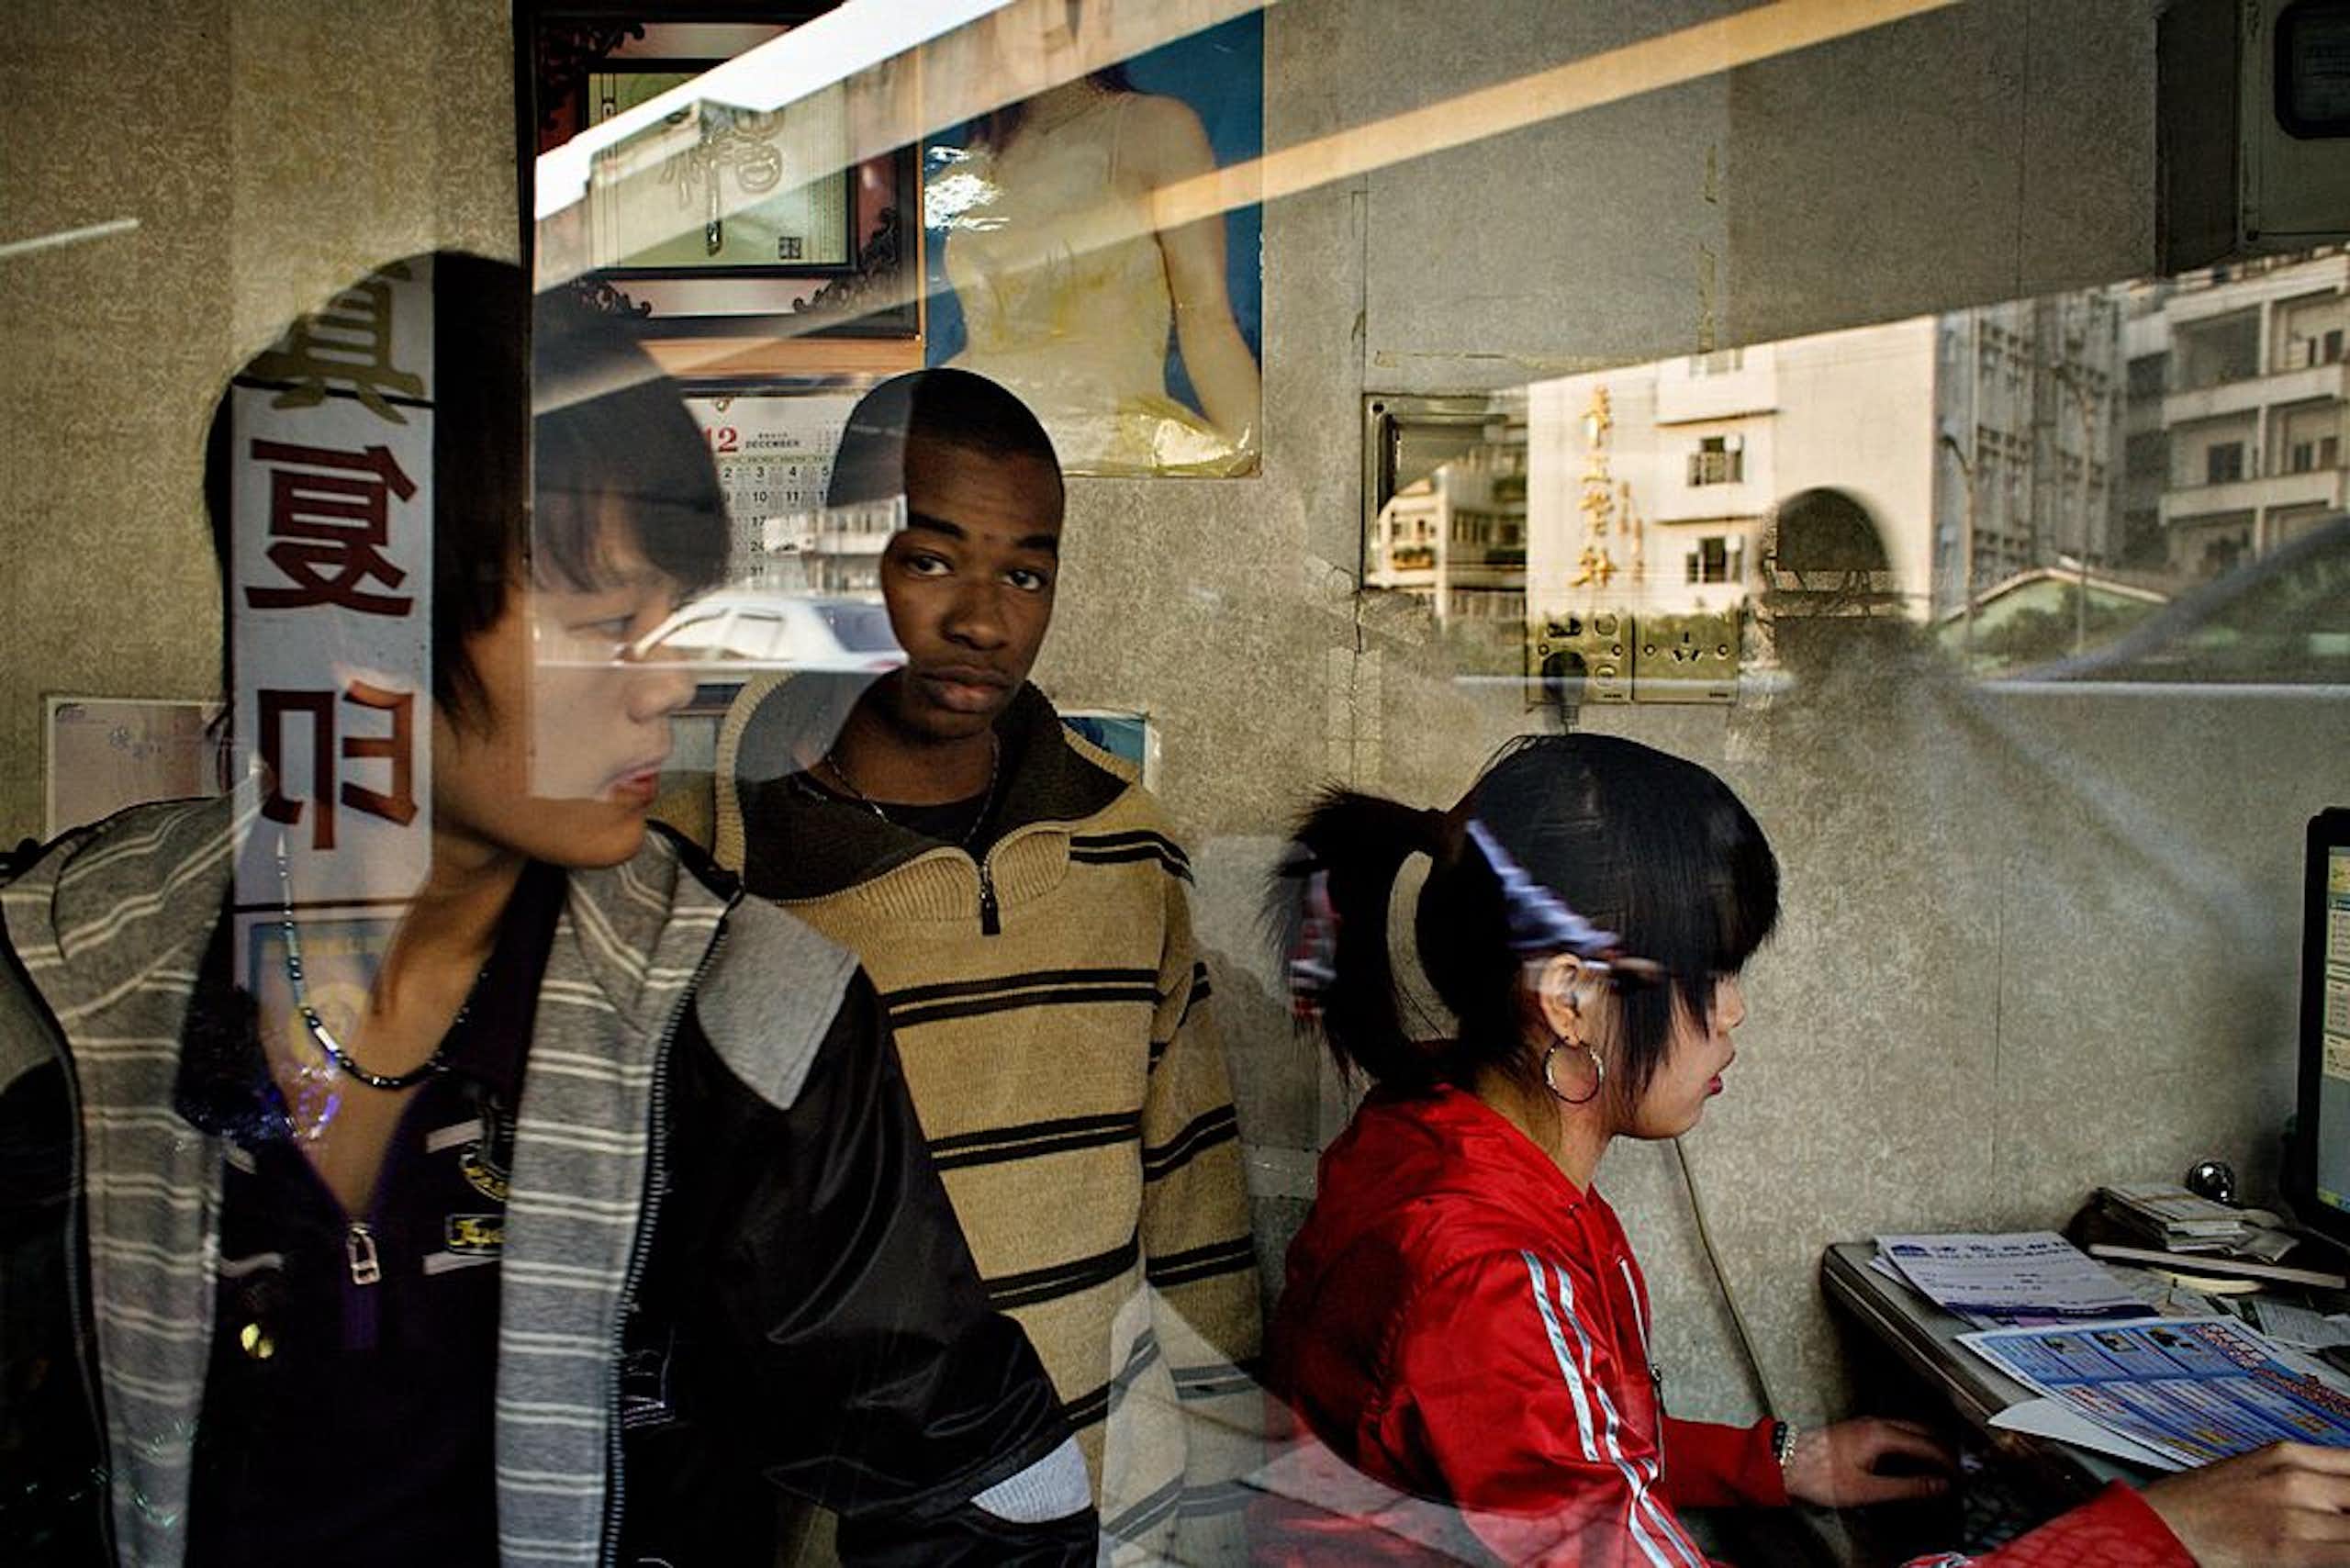 Through the glass of a shop front, three people are visible. A chinese woman and man flank an African man who looks into camera through the glass. A blurry reflection of a woman is seen passing on the street.